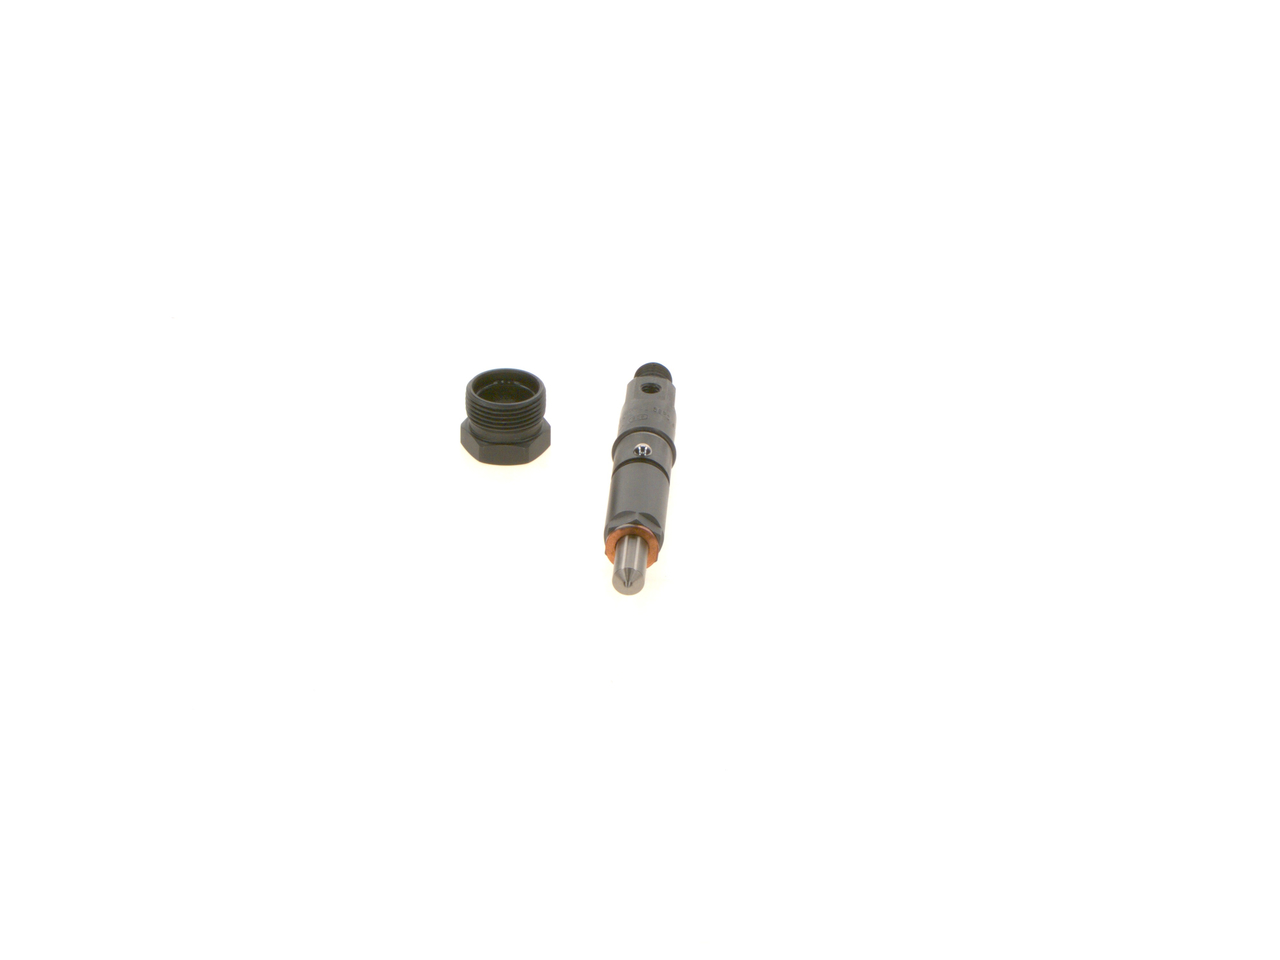 BOSCH 0 432 131 877 Nozzle and Holder Assembly